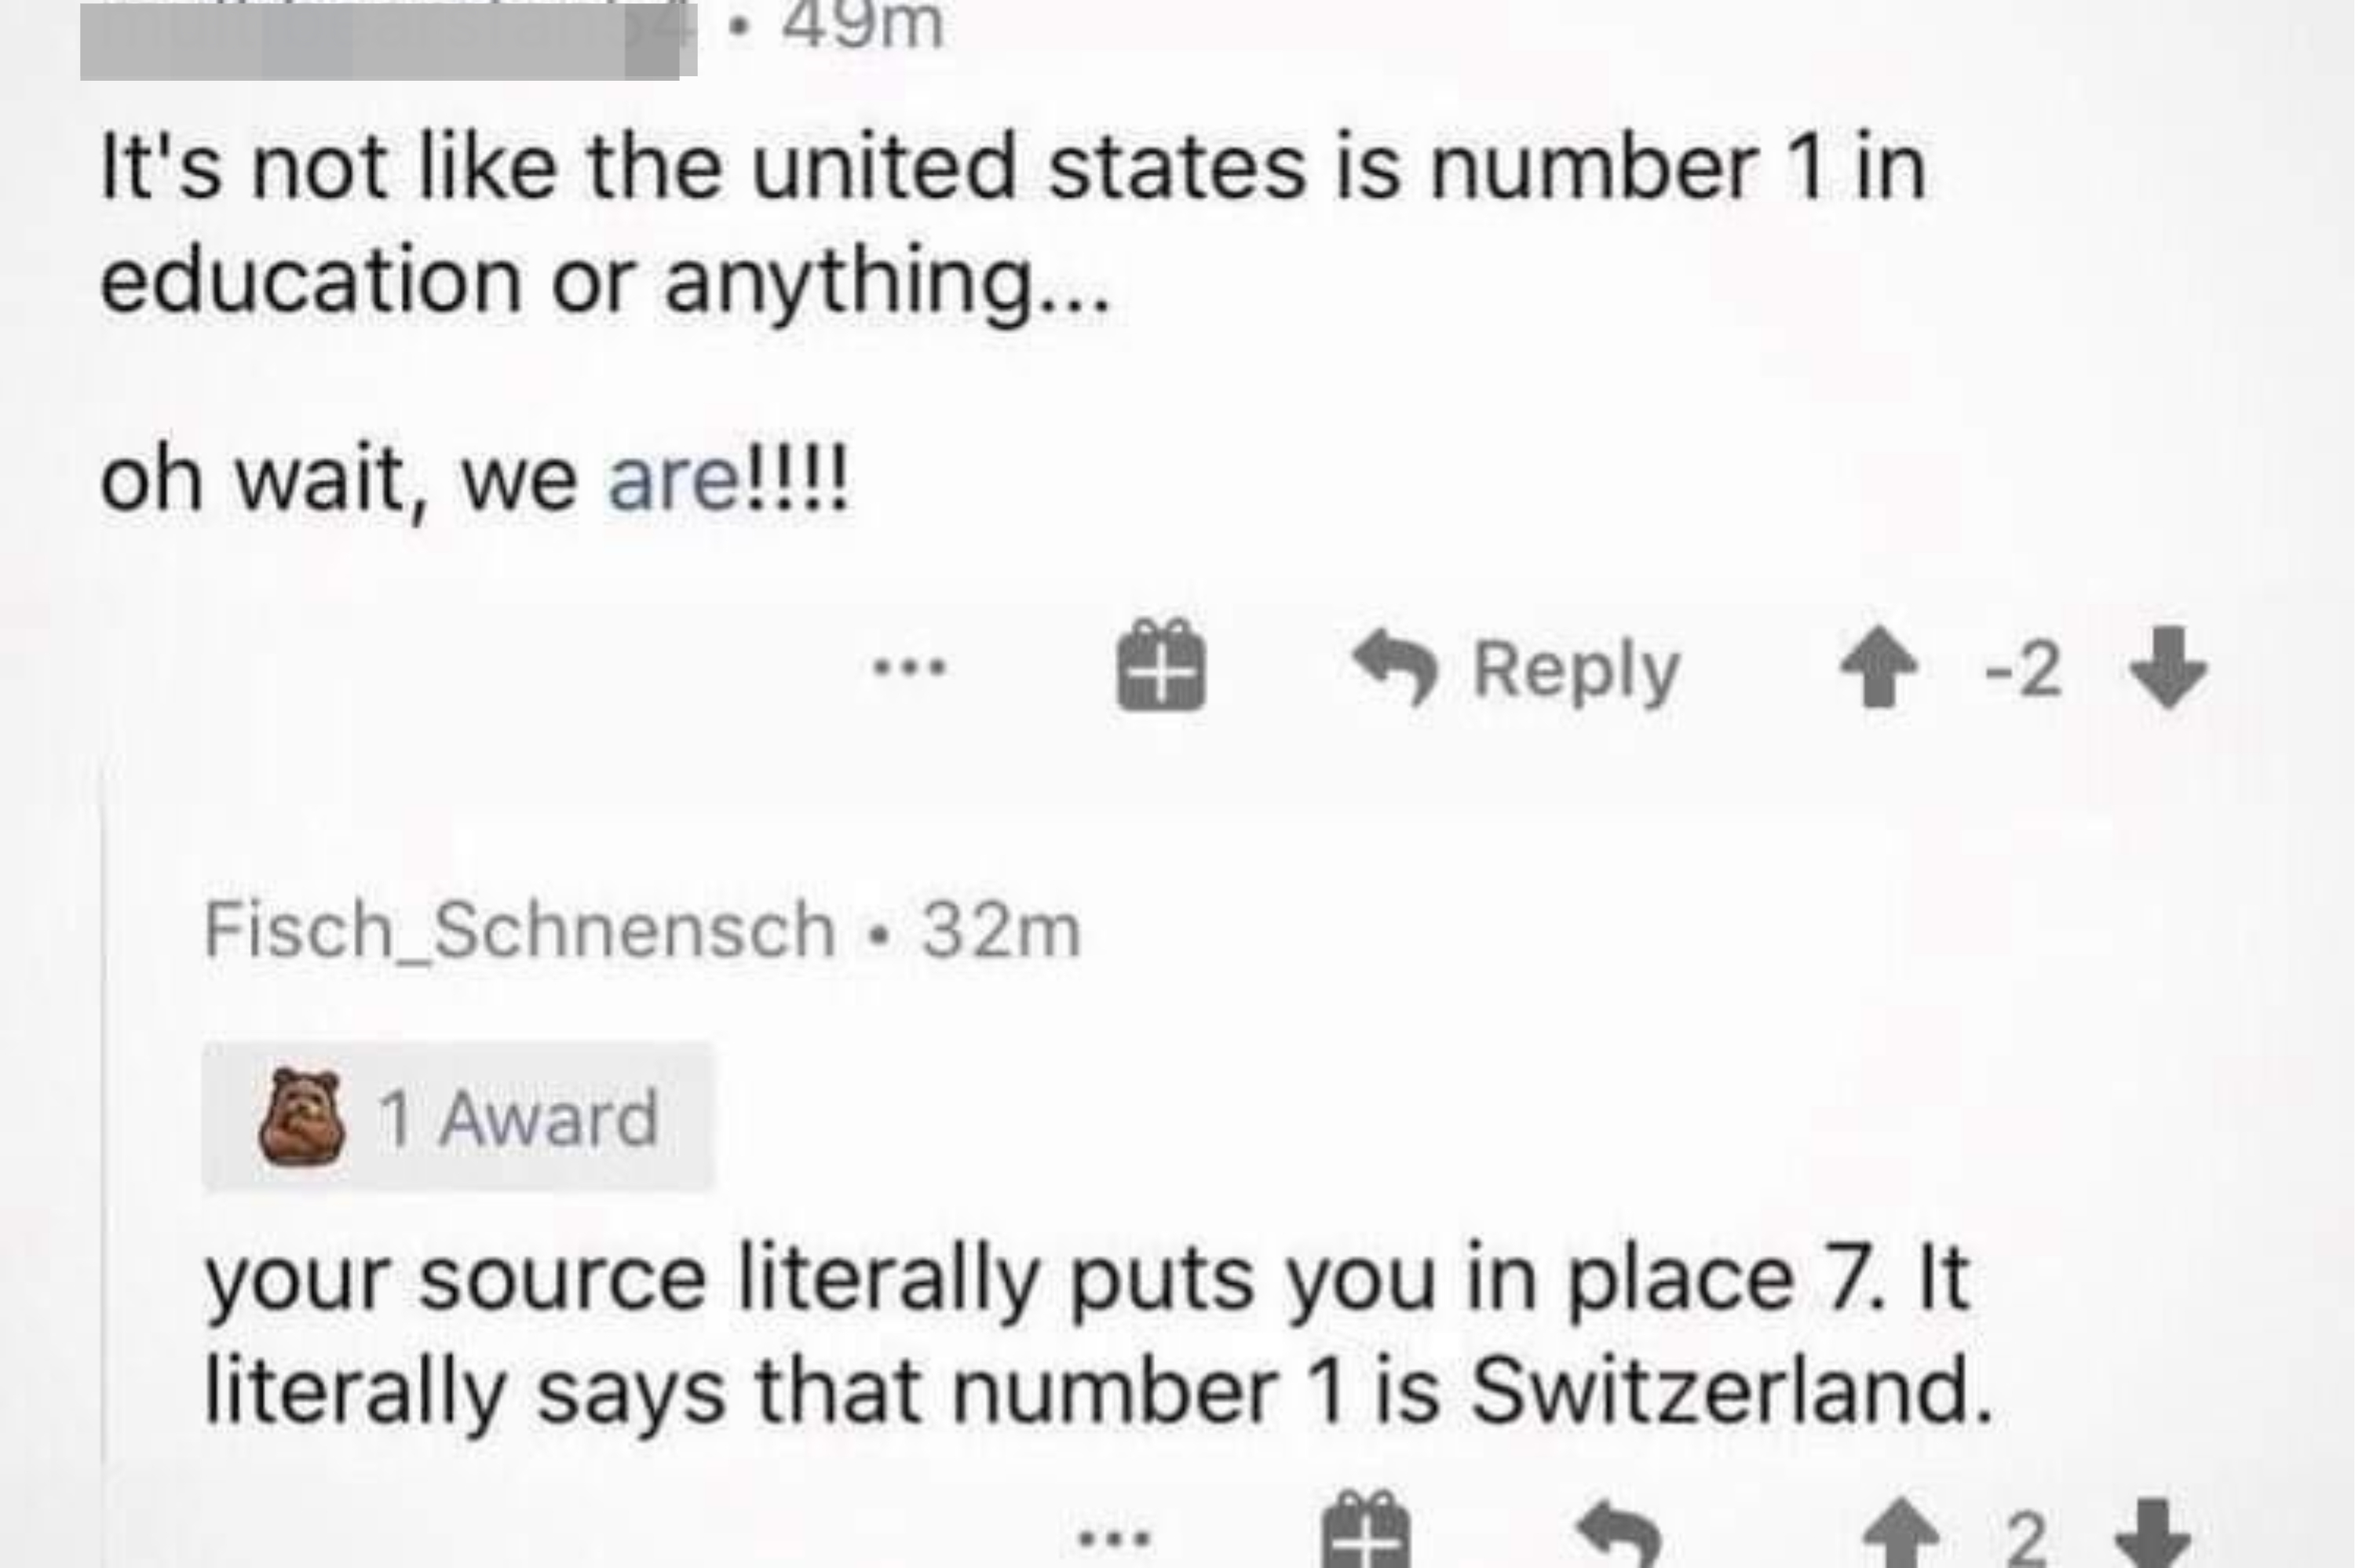 &quot;It&#x27;s not like the united states is number 1 in education or anything — oh wait, we are!!!!&quot; and &quot;Your source literally puts you in place 7; it literally says that number 1 is Switzerland&quot;